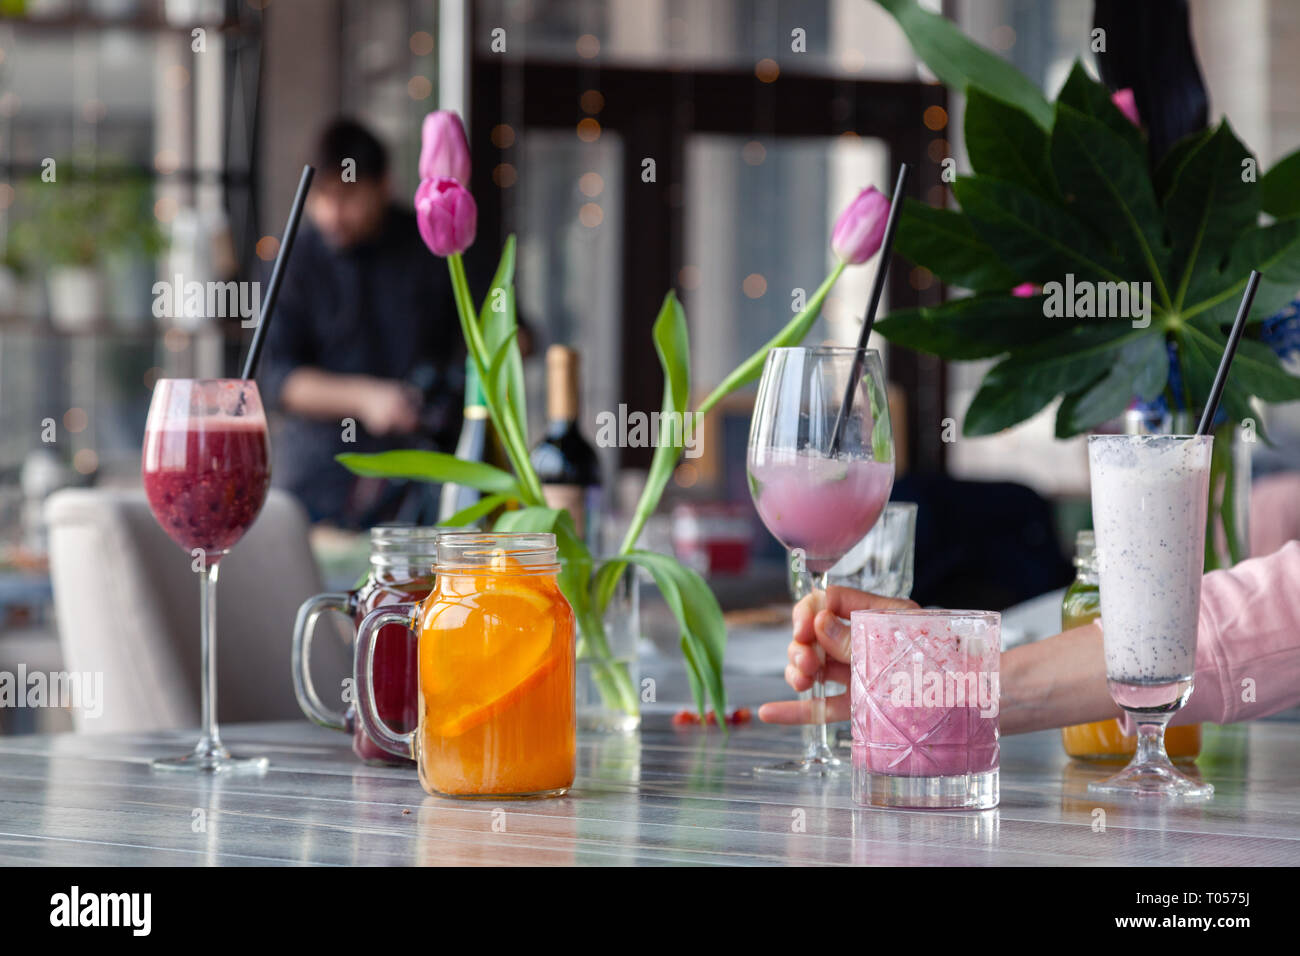 Food stylist and photographer decorate, preparing to shoot various cocktails, milkshakes, smoothies, flower tulips in vase on table. Concept professio Stock Photo